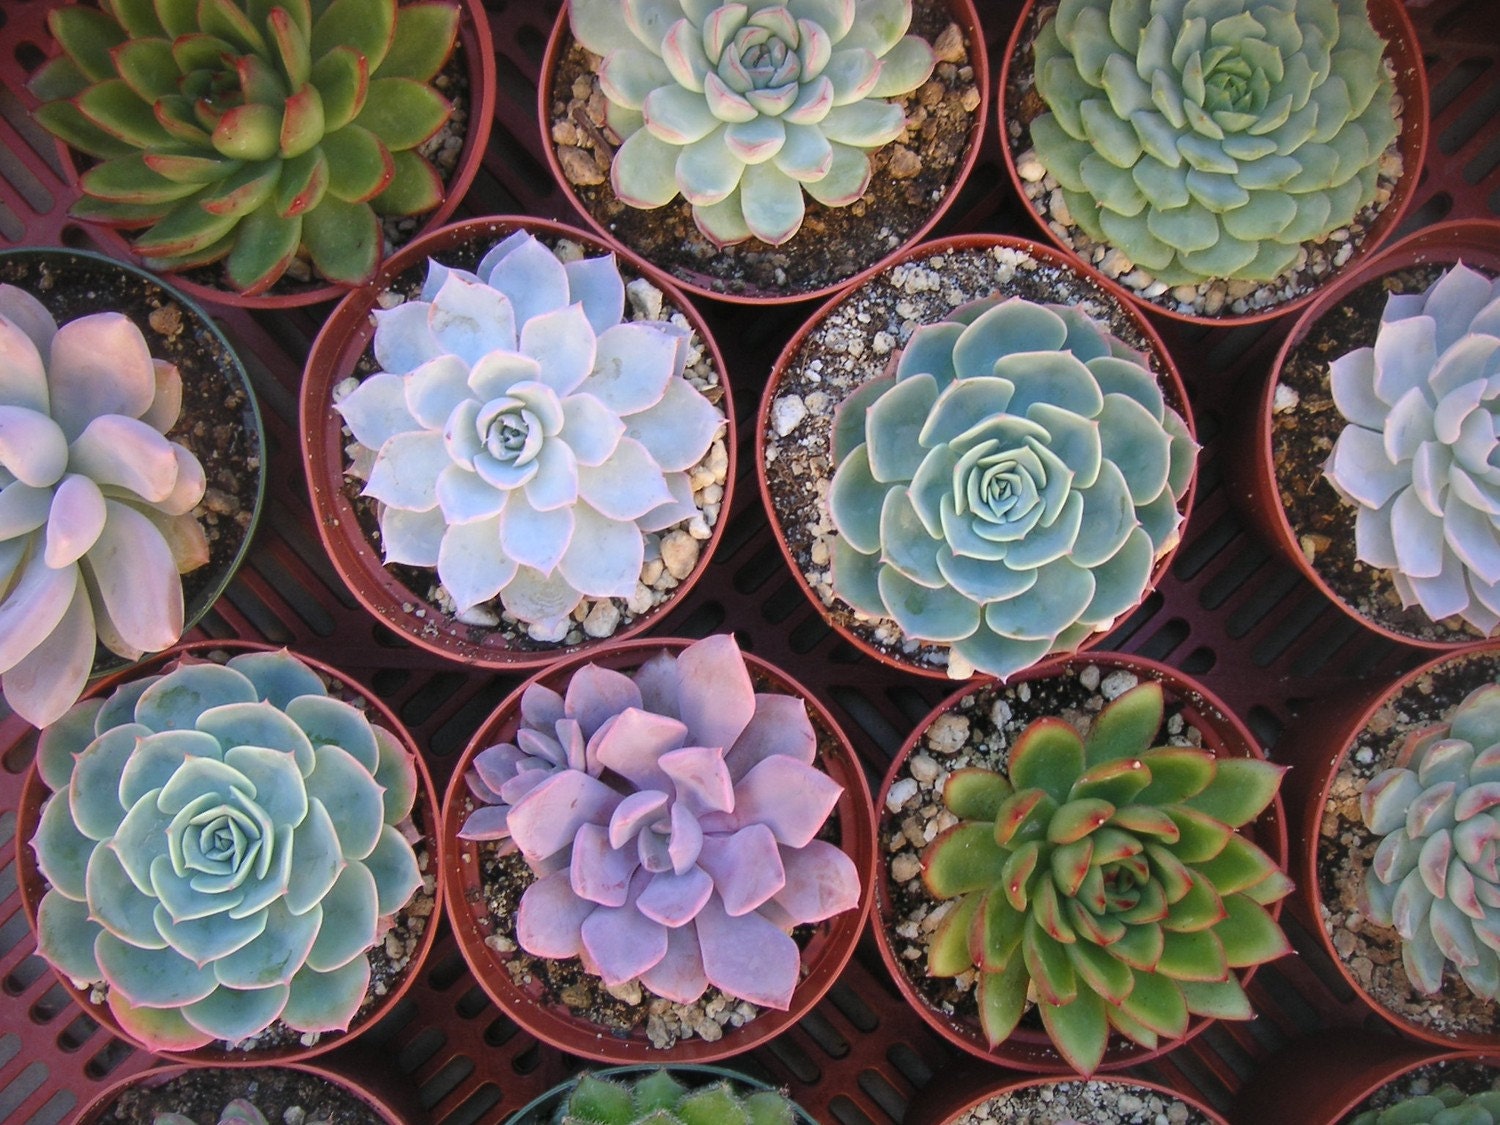 6 Large Succulent CUTTINGS, Rosette Shape, Great Size For Your Bouquet, Wedding Decor, From 4 Inch Pots